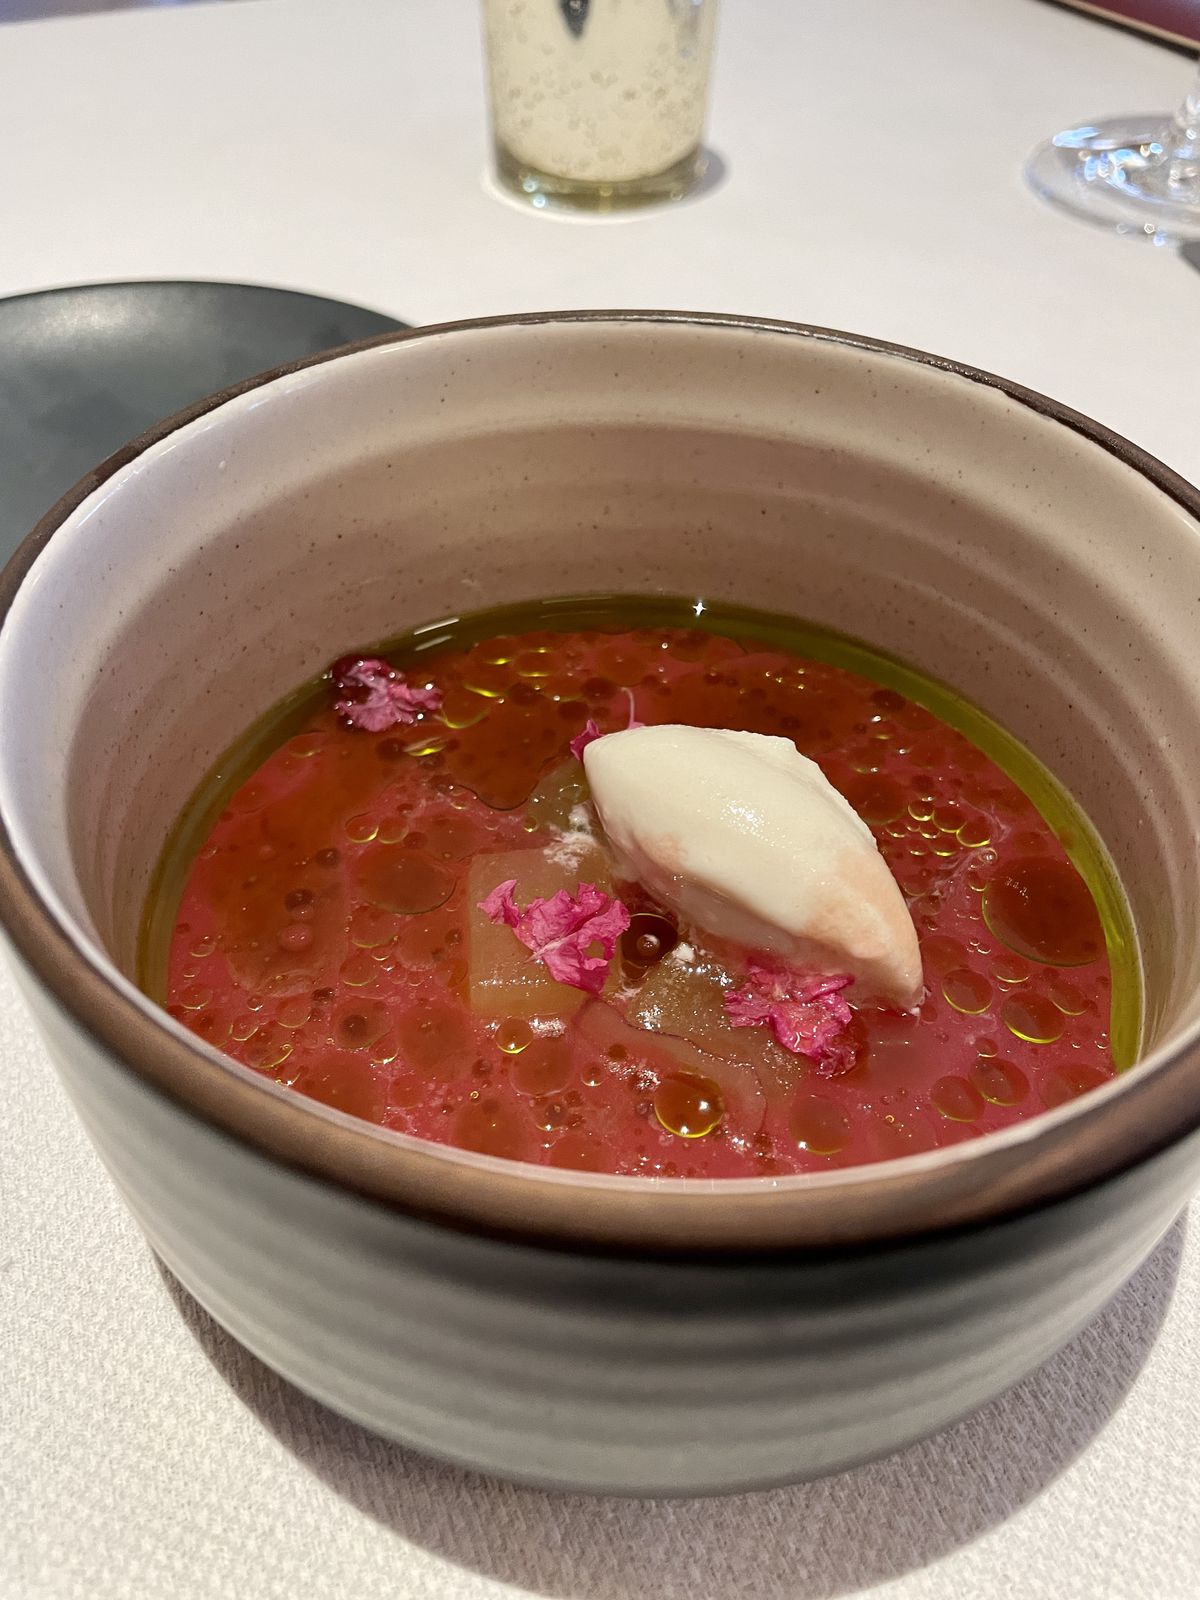 A light brown bowl holds watermelon gazpacho with visible oils and a dollop of buttermilk sorbet.